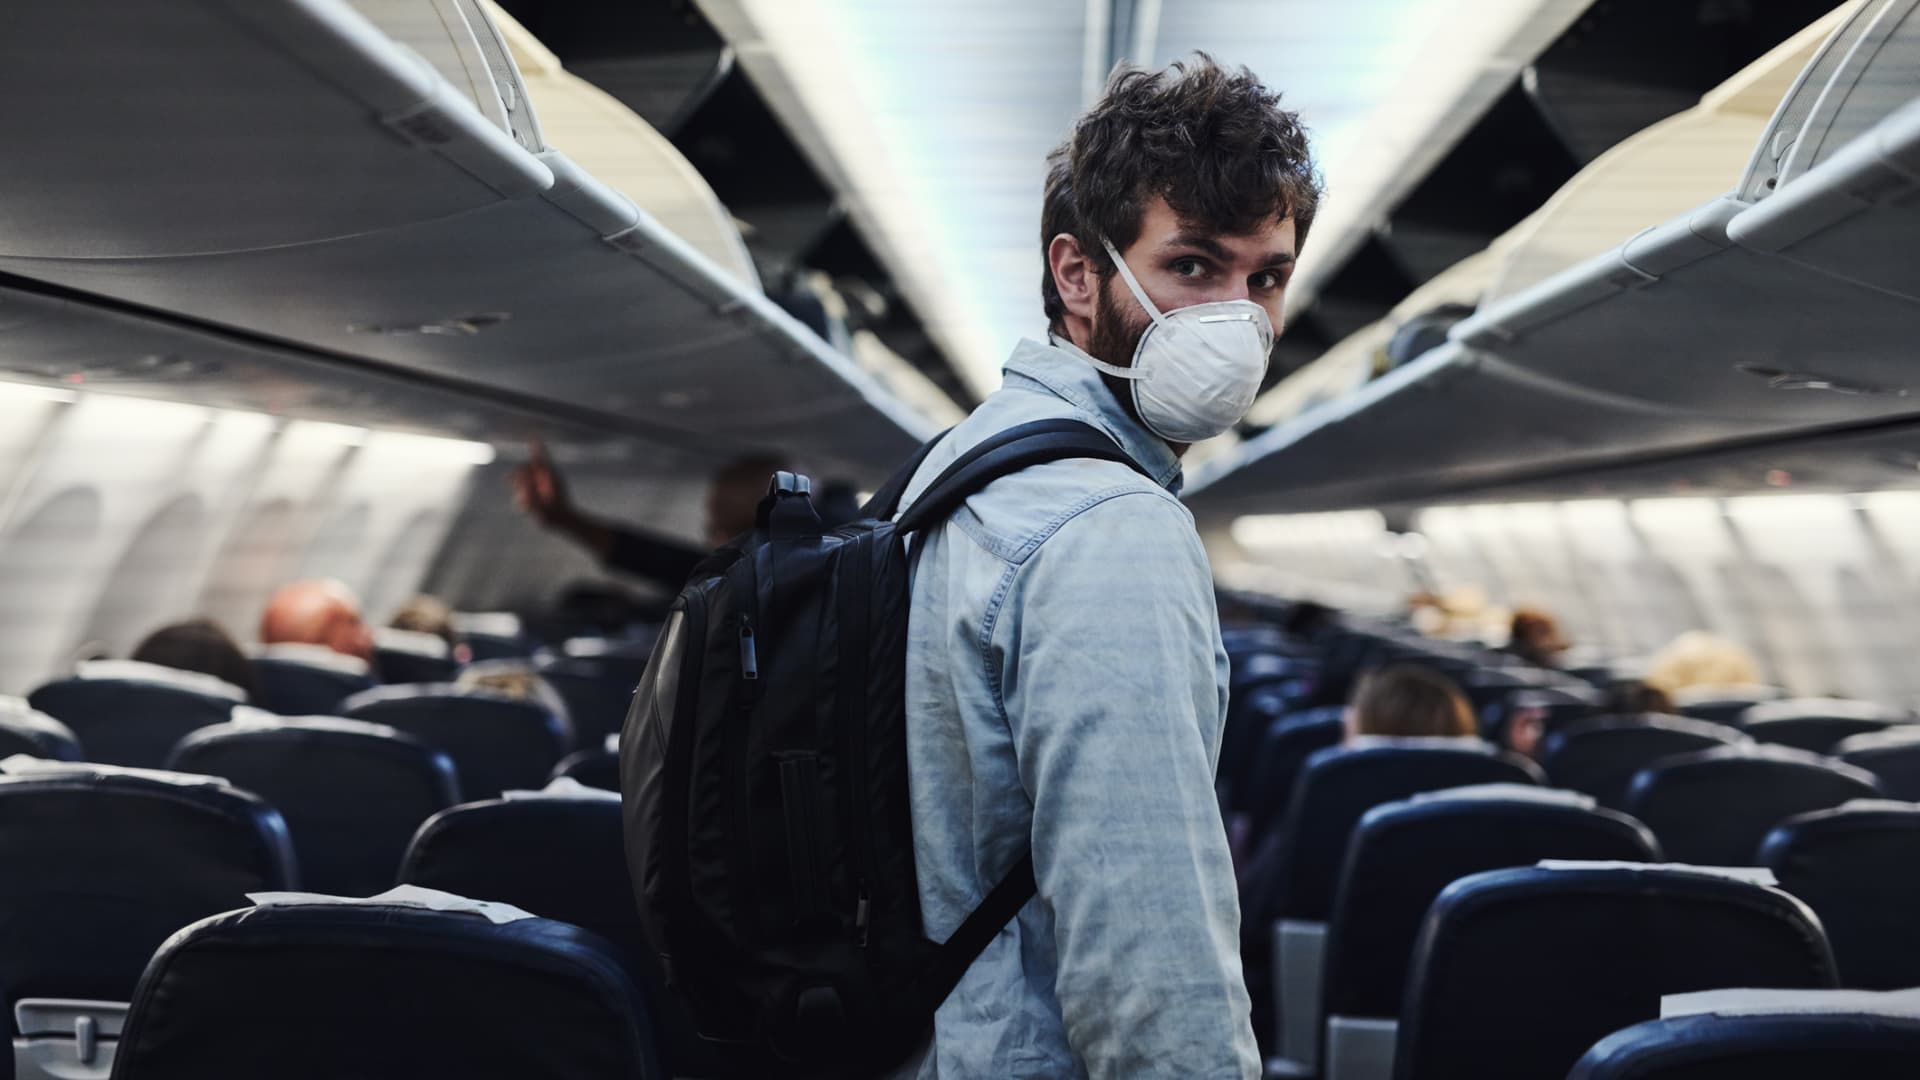 The Nationwide Travel Mask Mandate Has Ended ... For Now